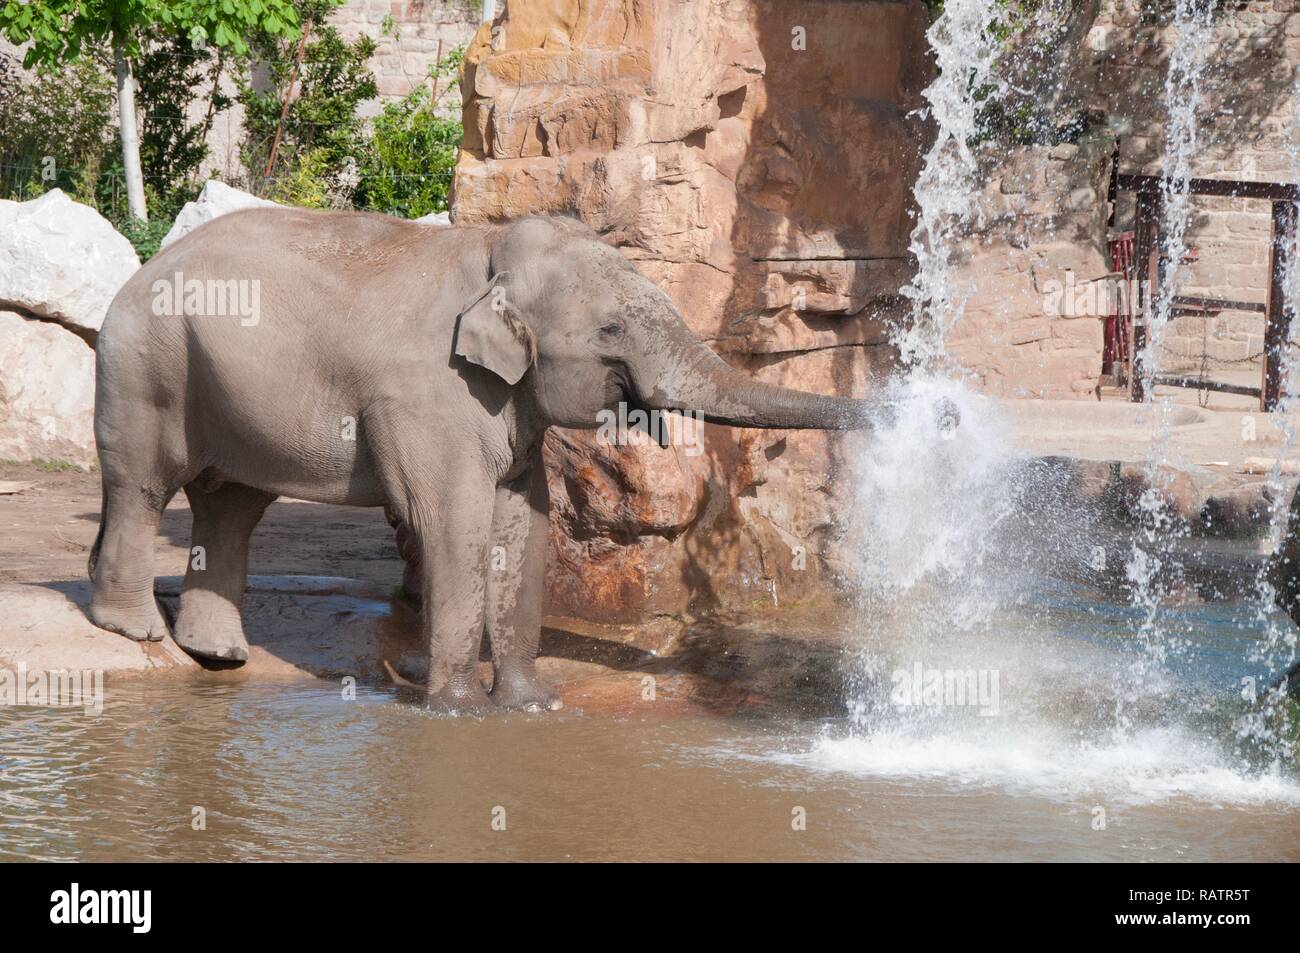 An Elephant drinking from a waterfall Stock Photo